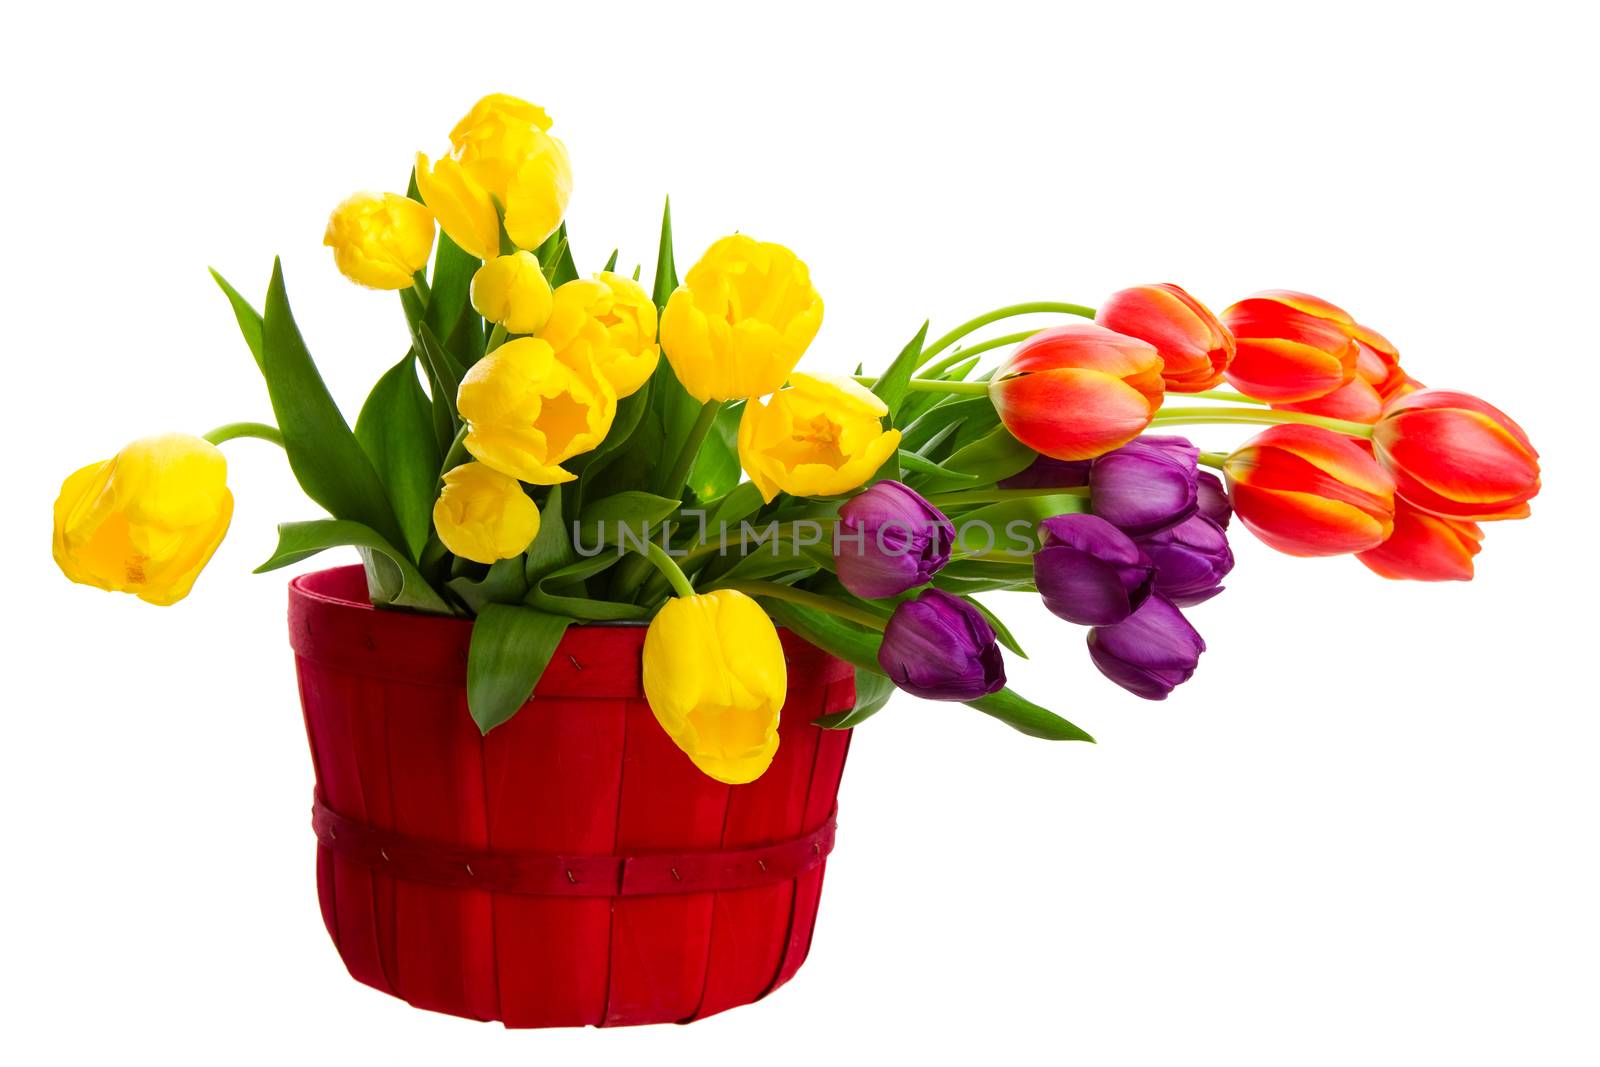 Colorful Cut Tulips by songbird839